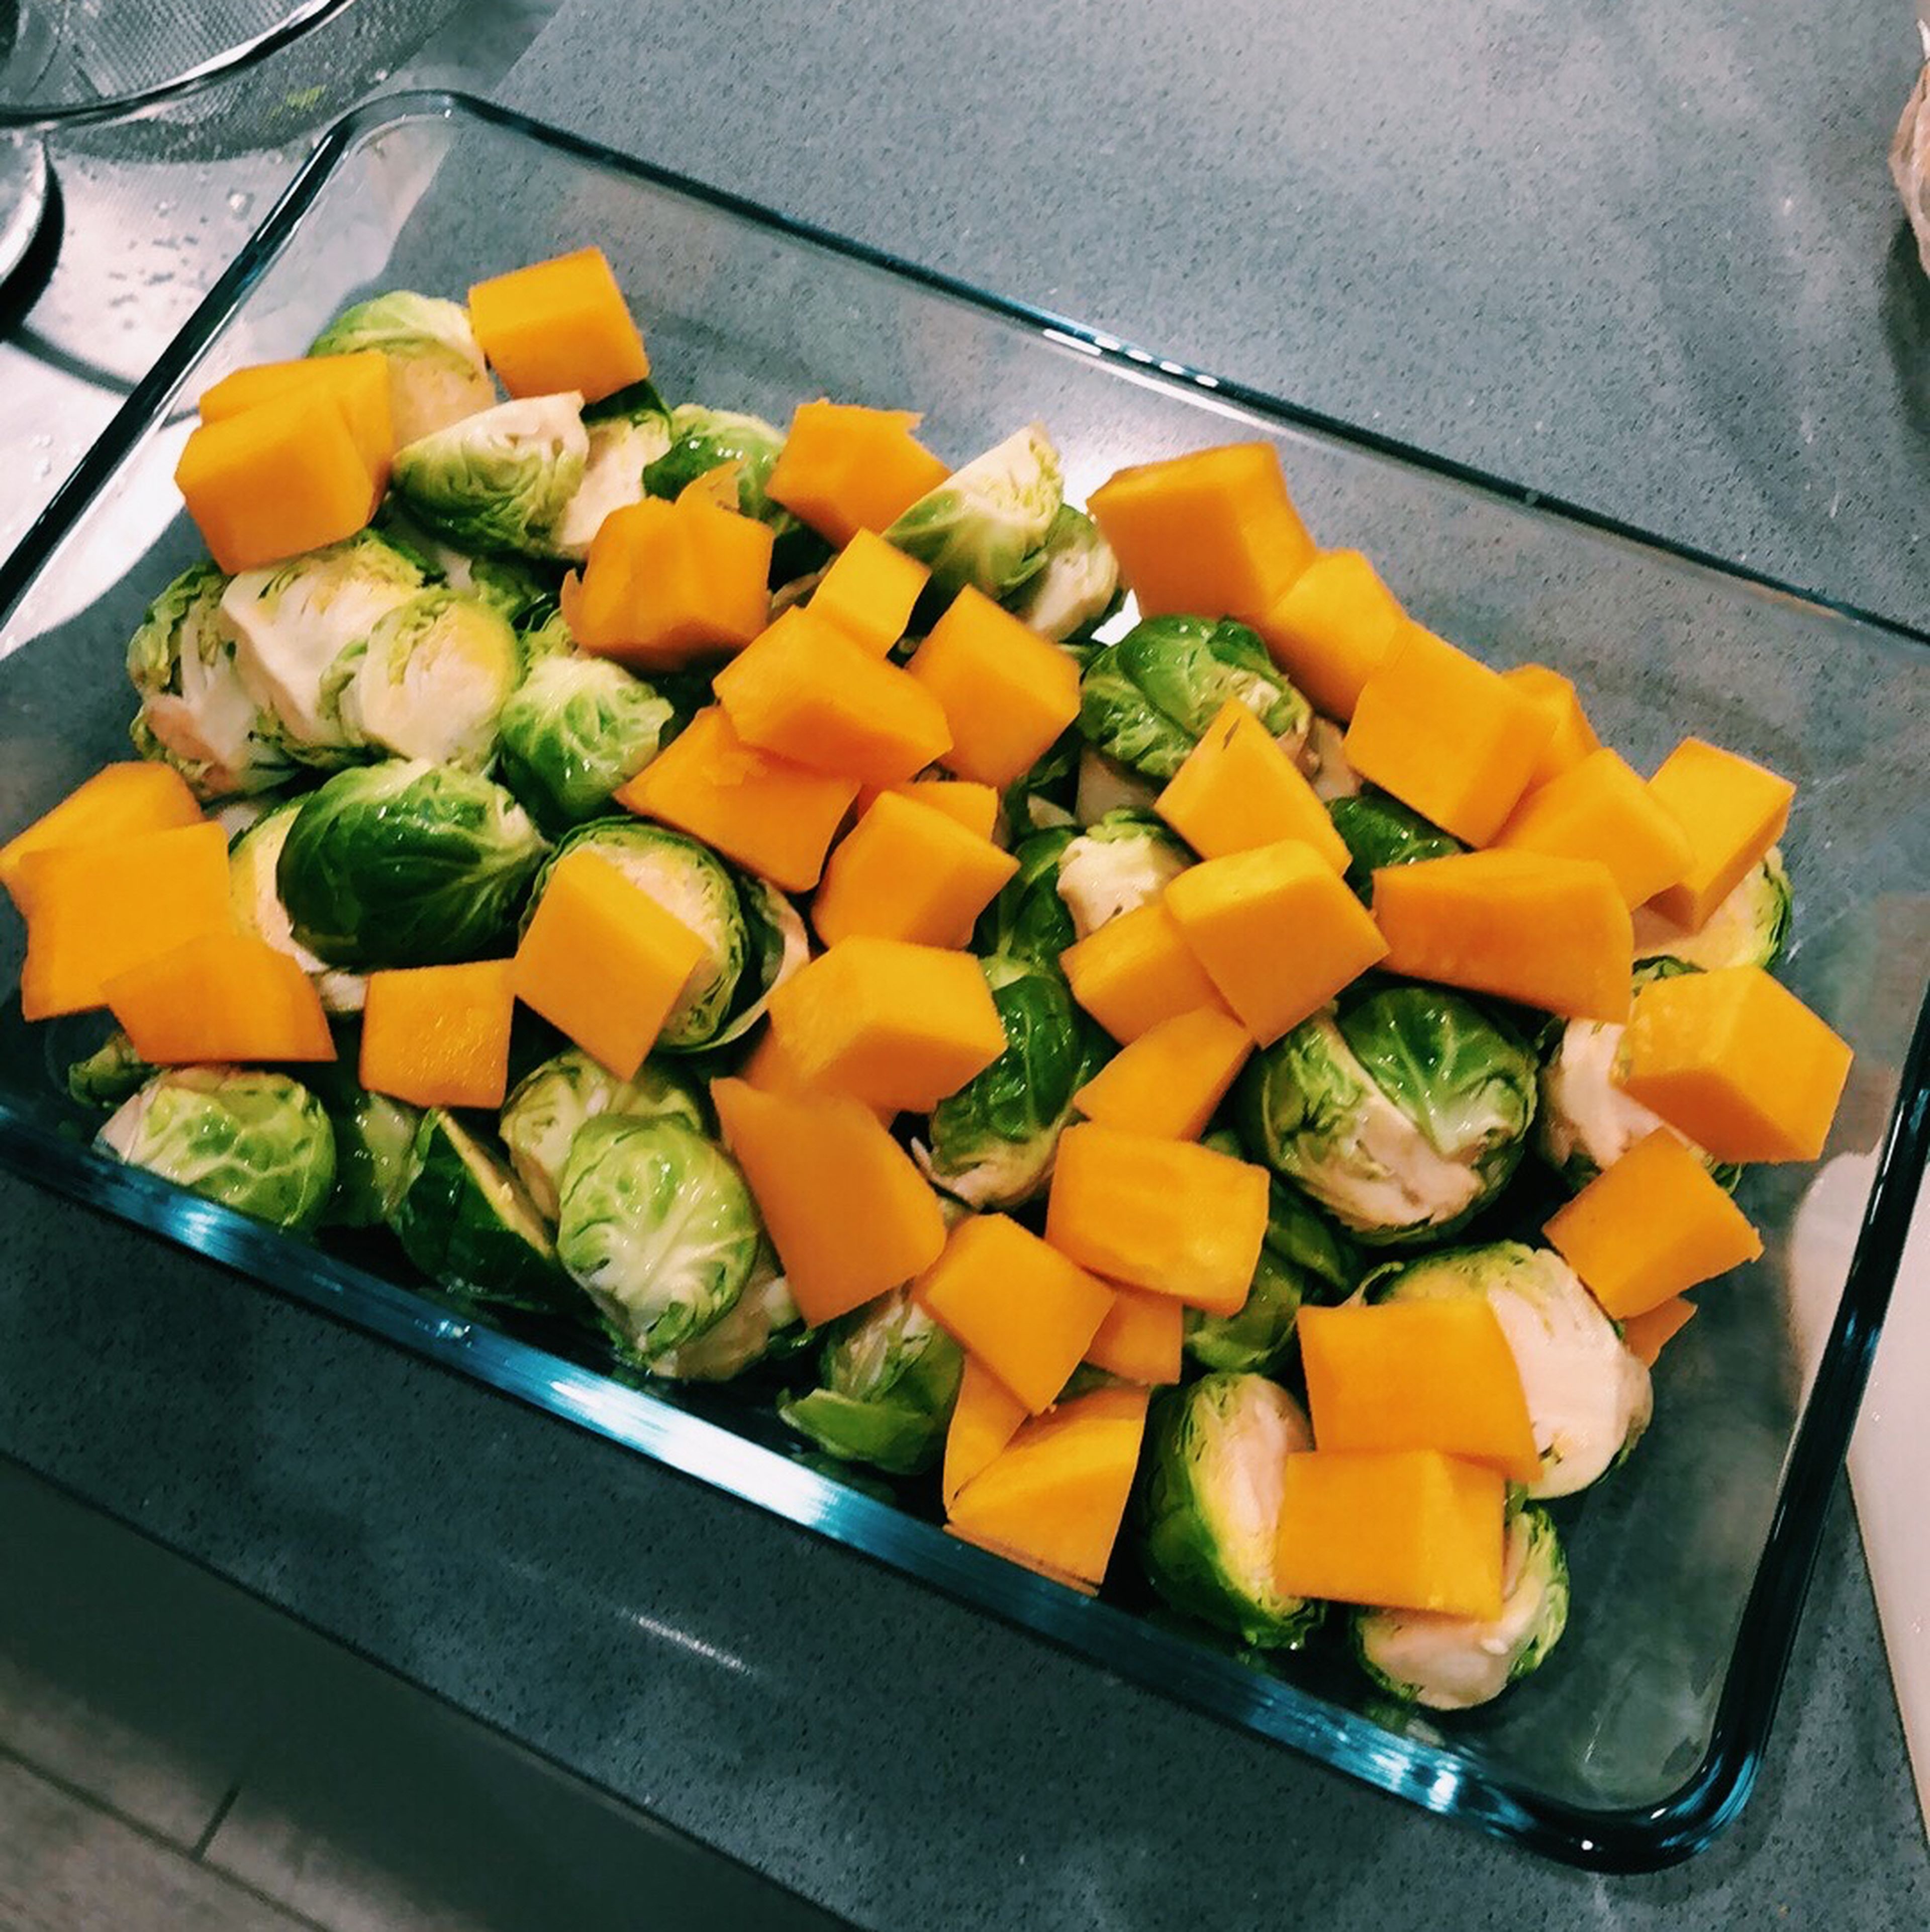 Prepare the vegetables and add to an oven proof dish. Coat in sesame oil and season to taste with salt and pepper.